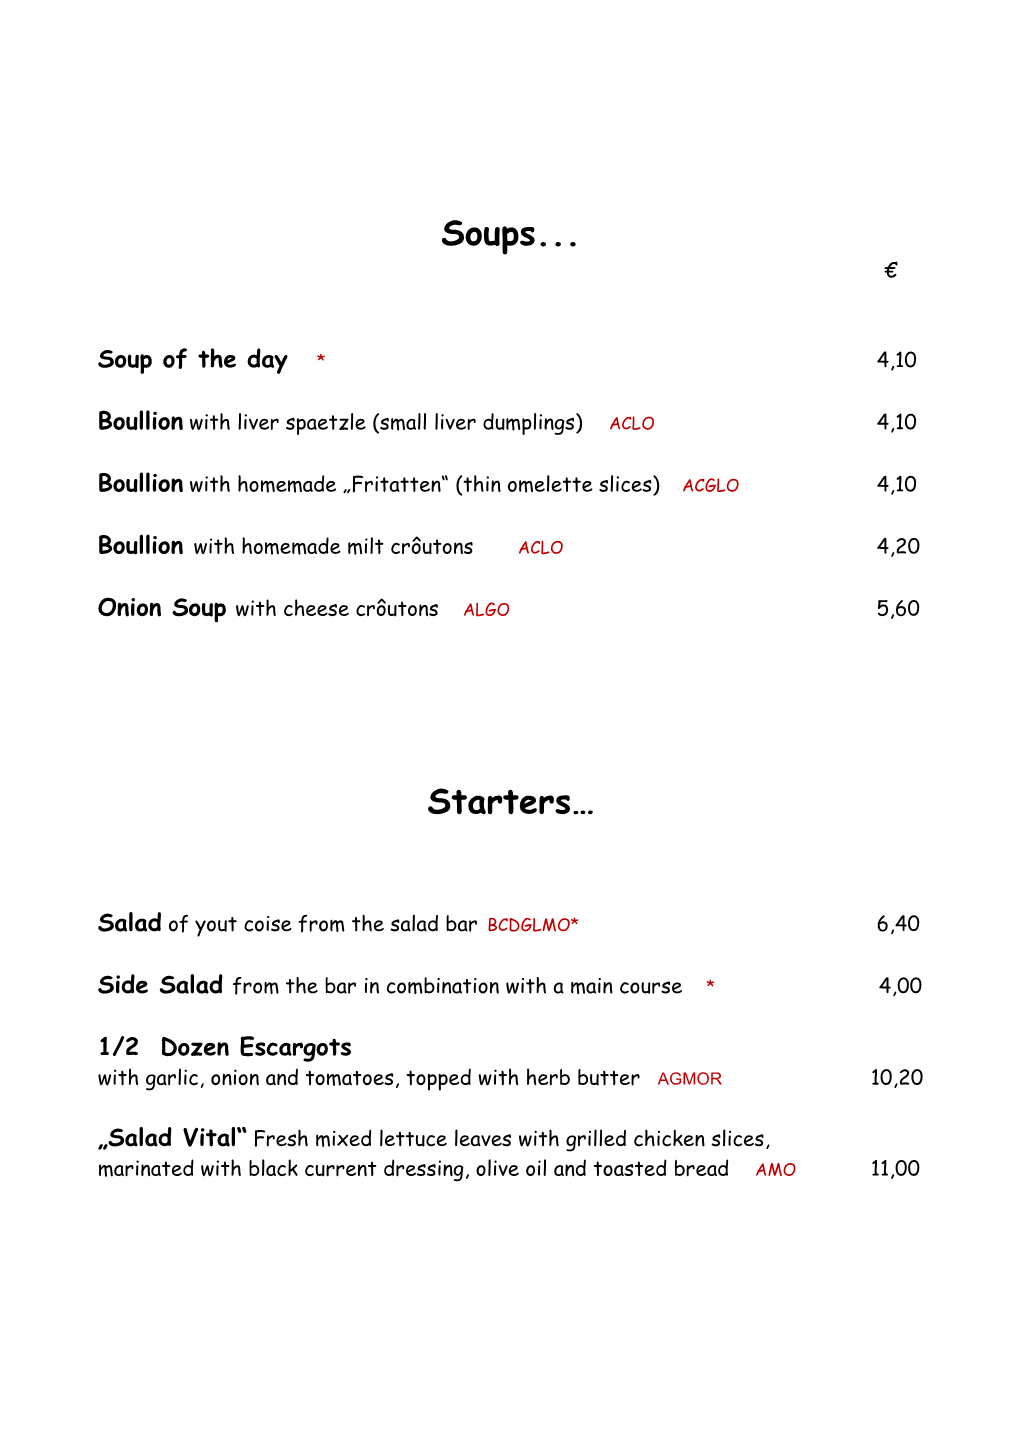 Soups... Starters…